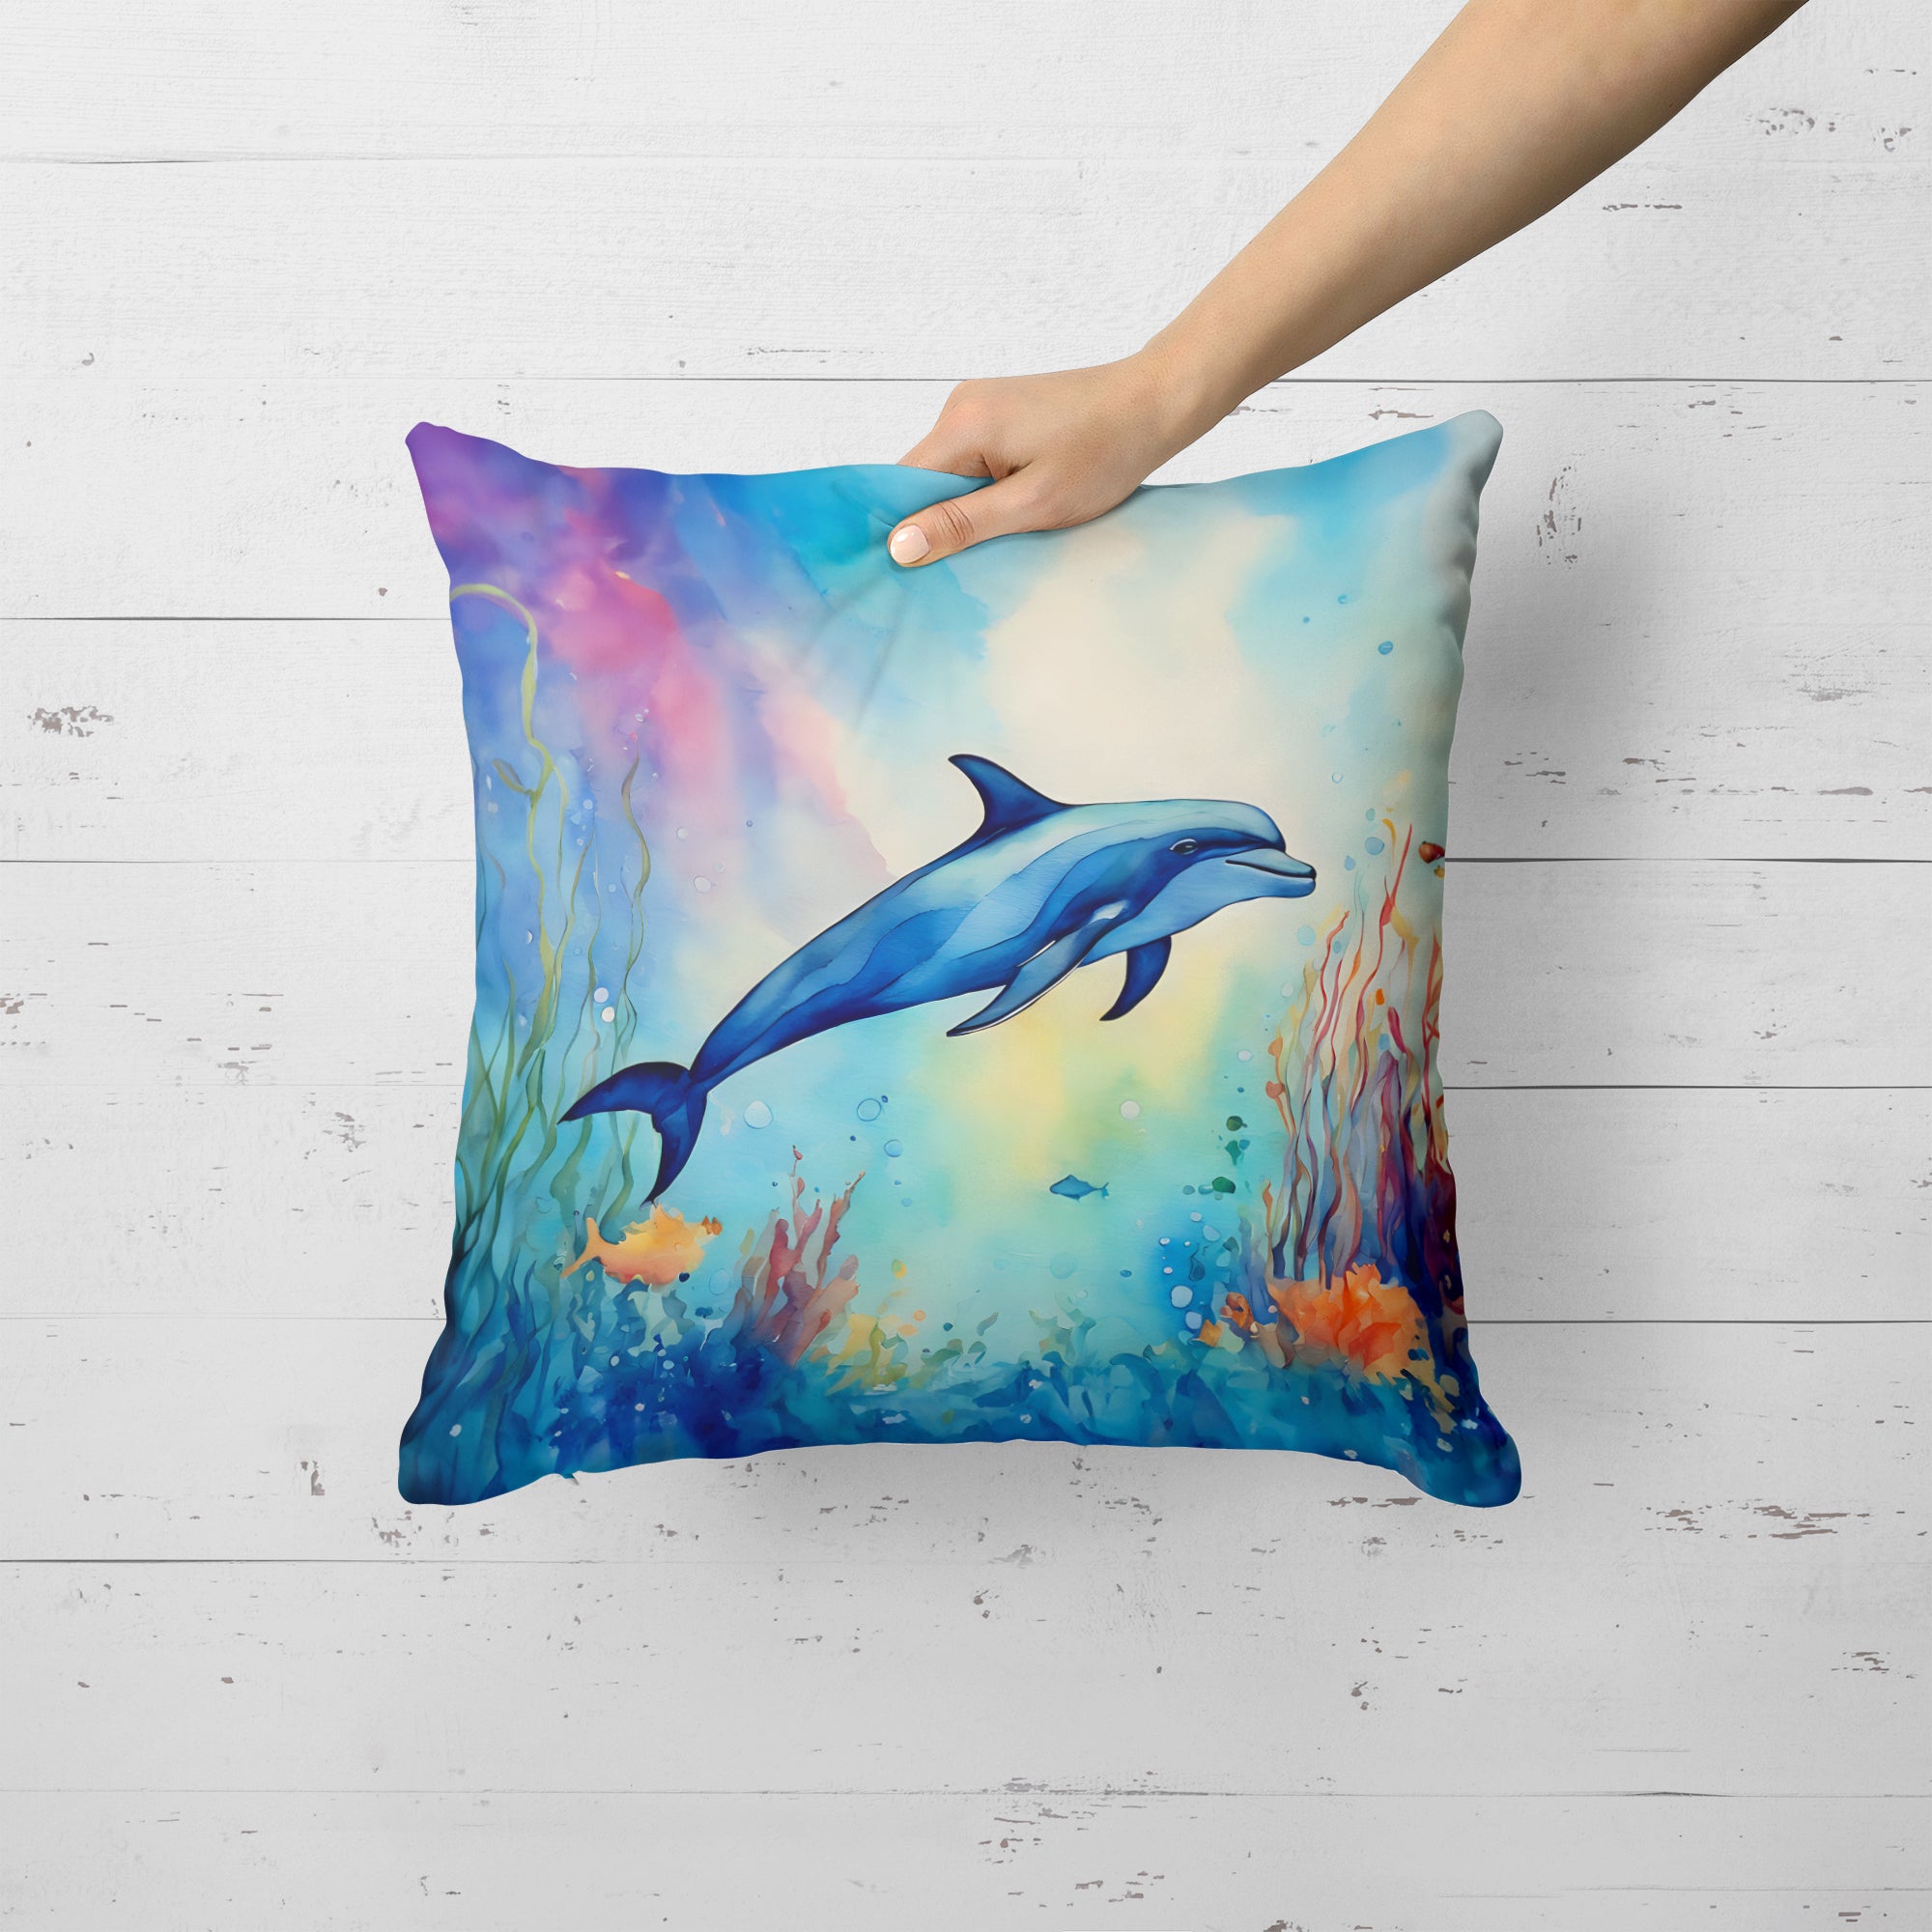 Buy this Dolphin Throw Pillow